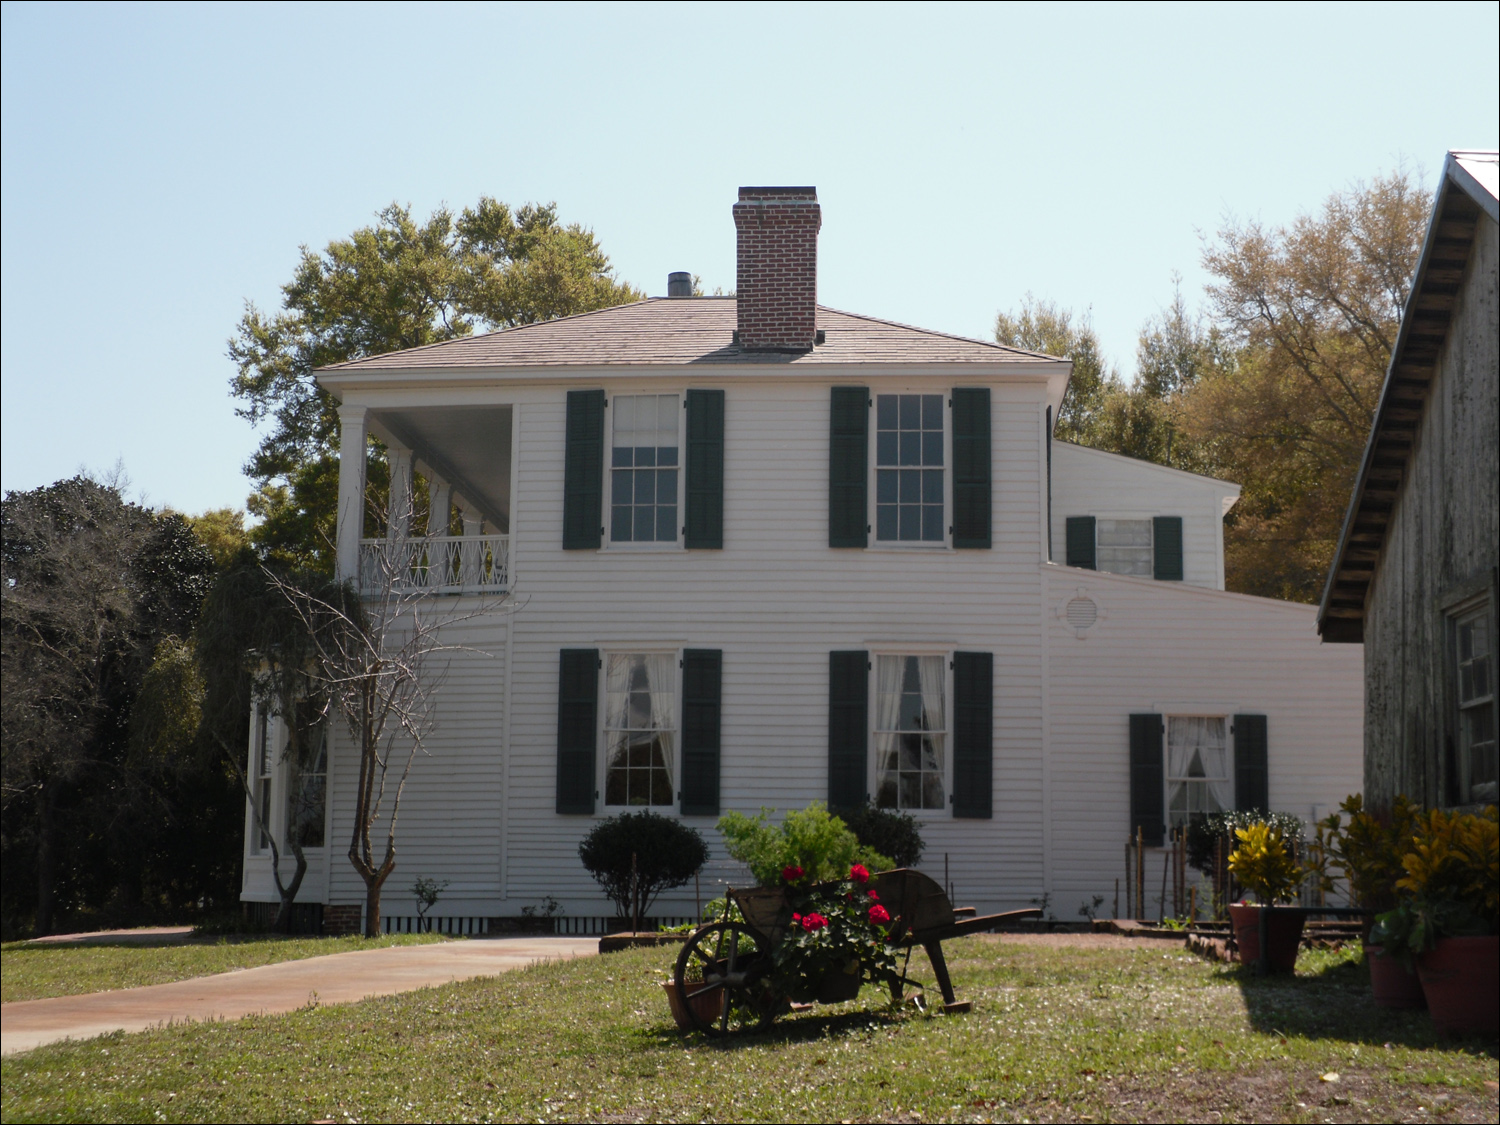 Orman House in Apalachicola